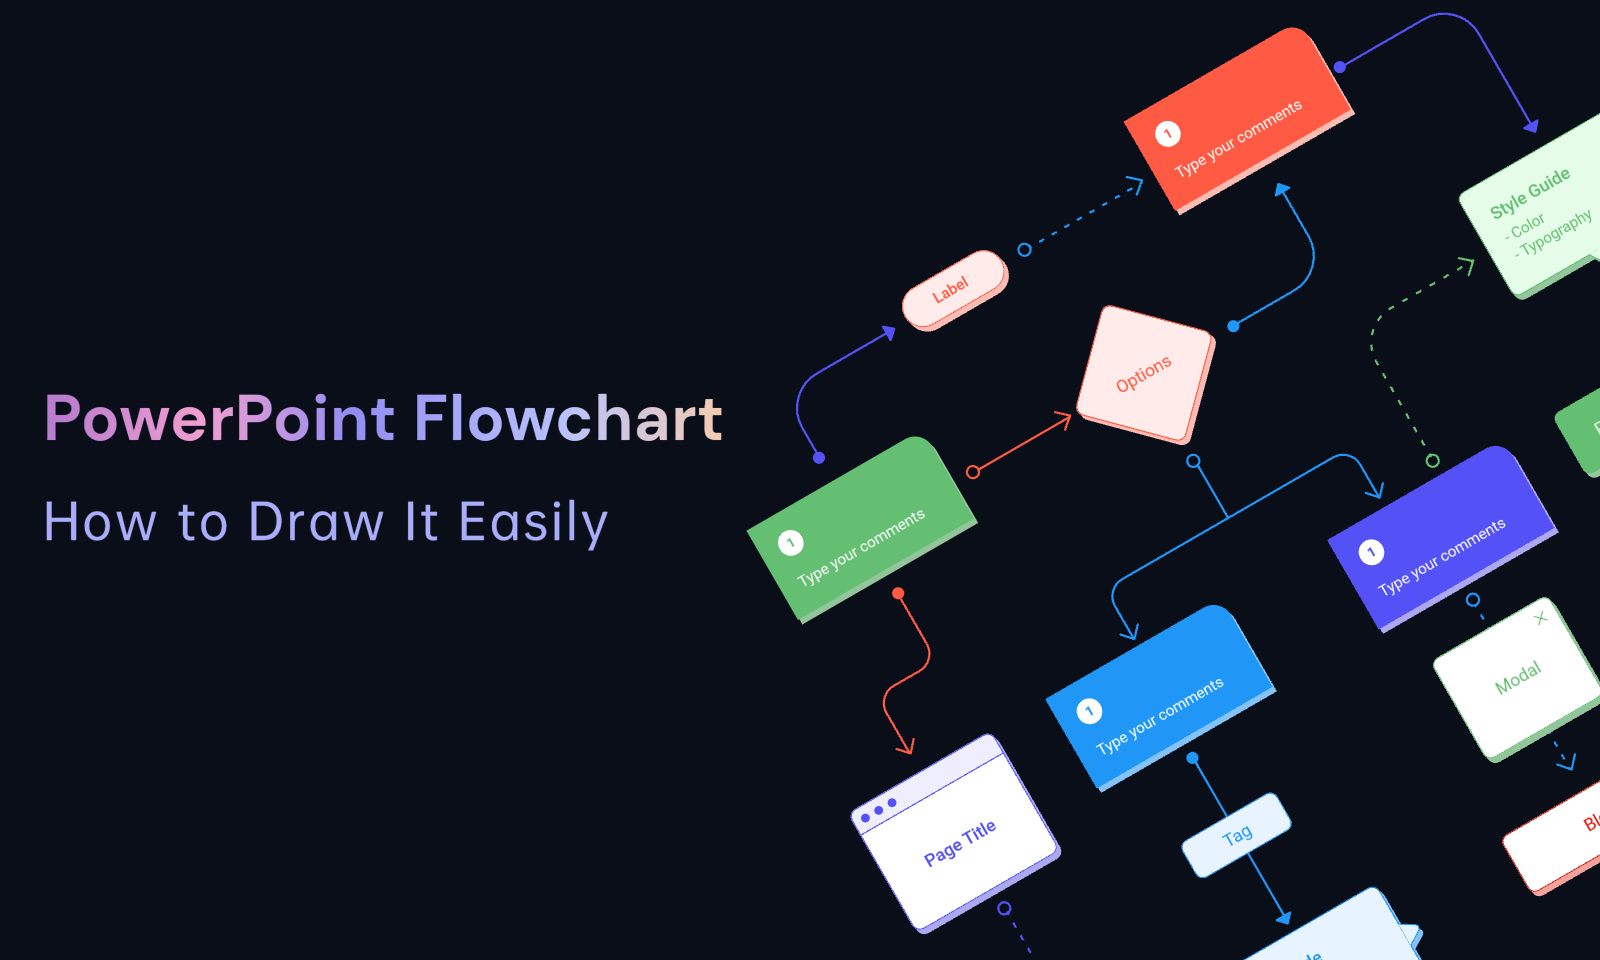 PowerPoint Flowchart - How to Draw It Easily